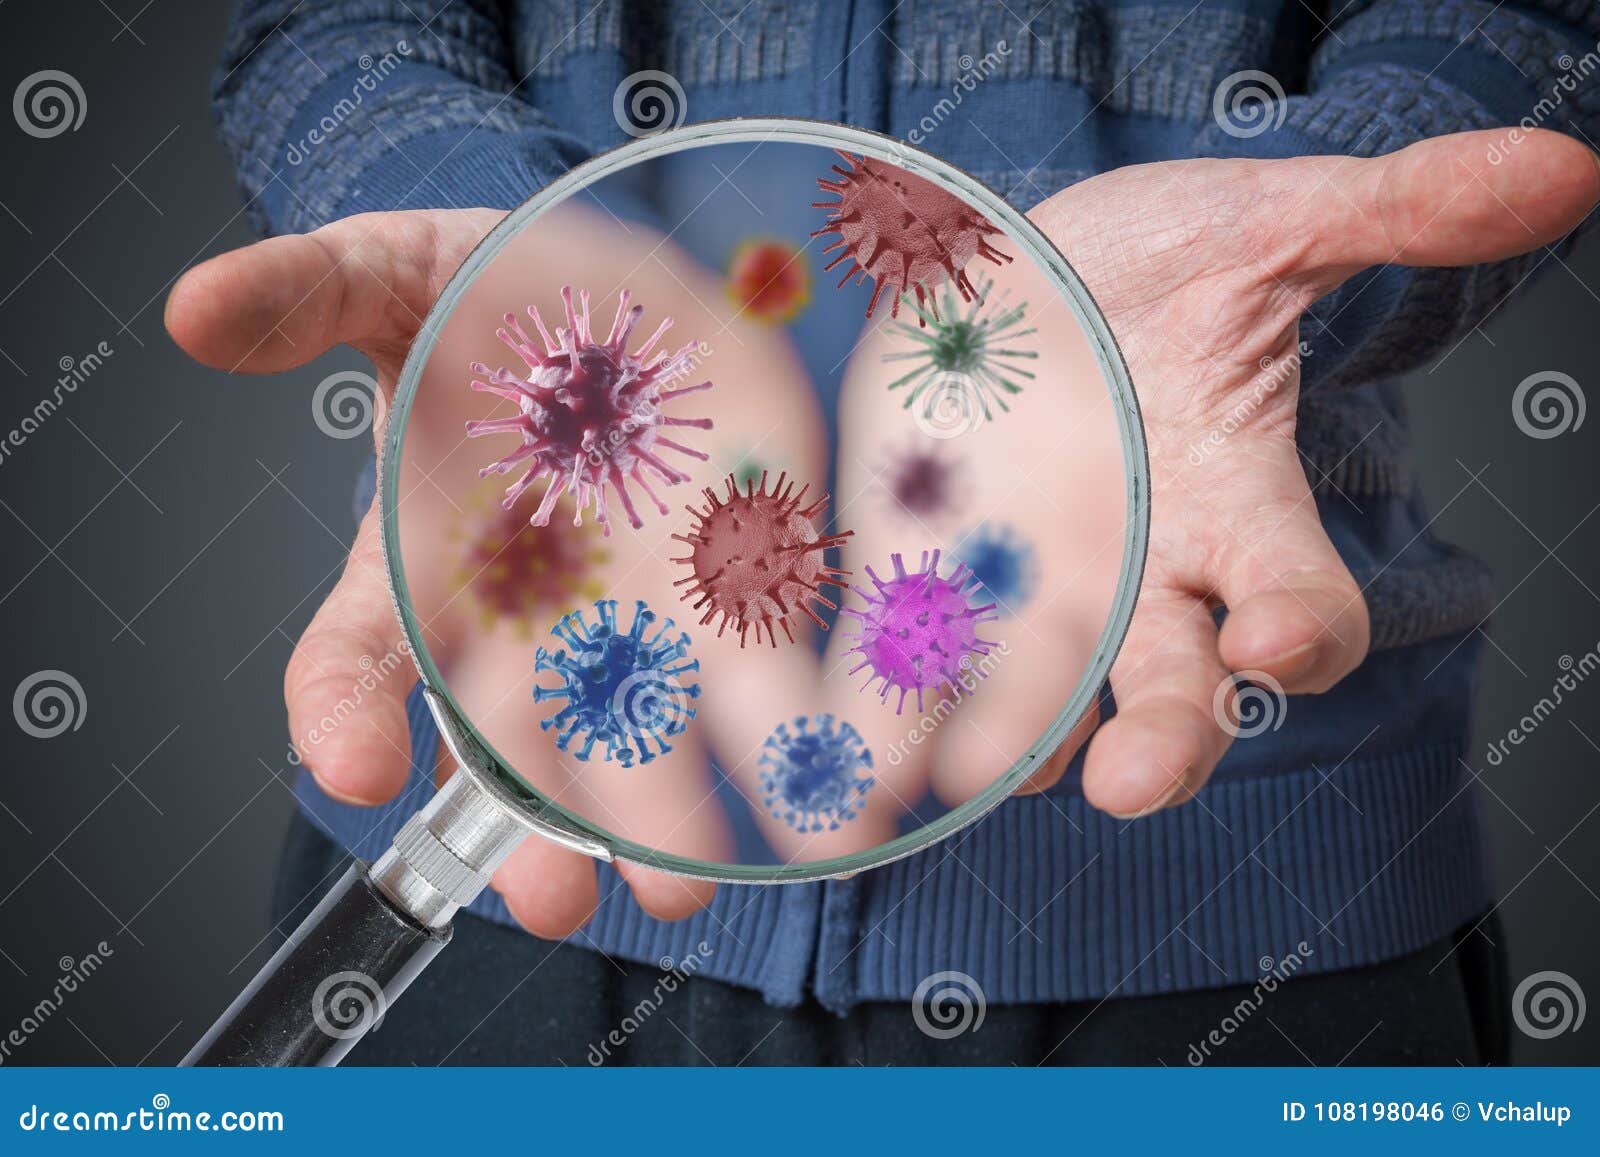 hygiene concept. man is showing dirty hands with many viruses and germs